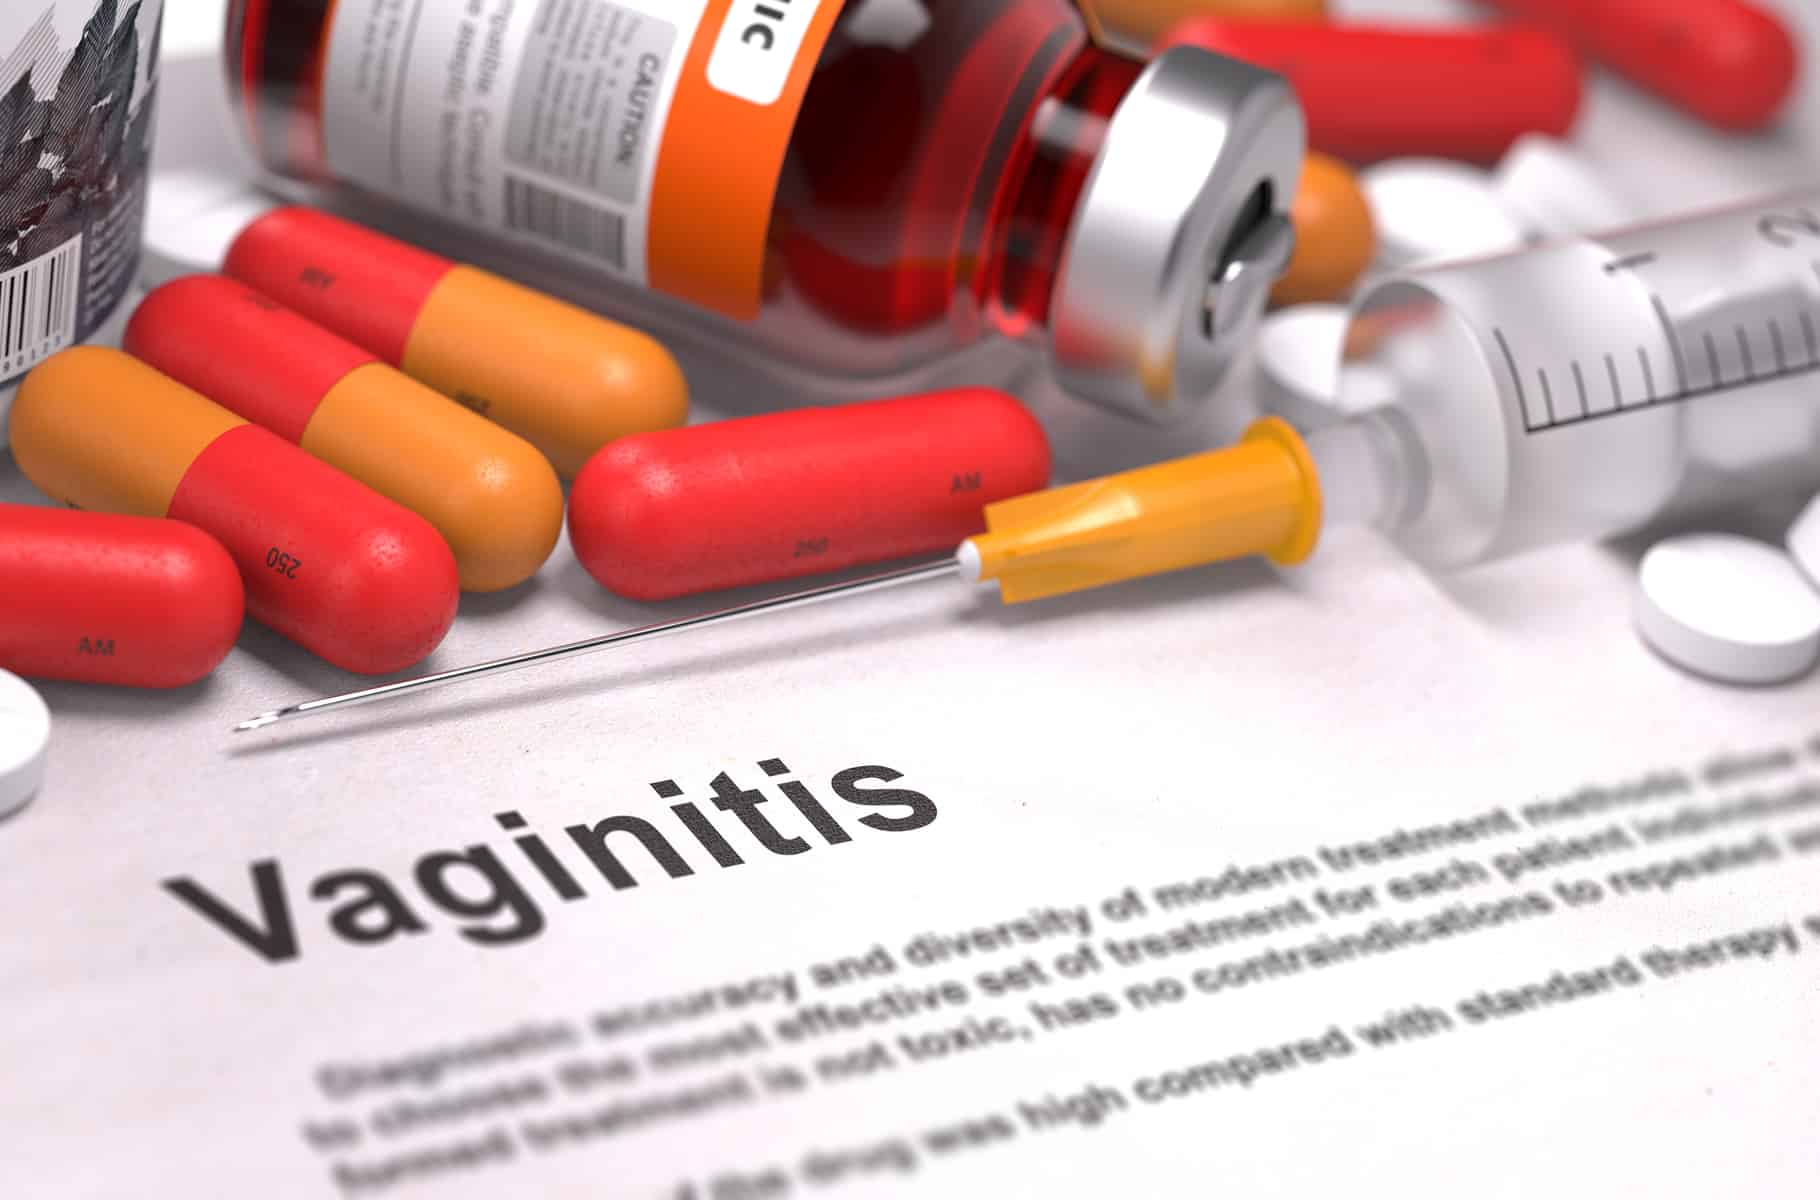 Vaginitis - Printed Diagnosis with Blurred Text. On Background of Medicaments Composition - Red Pills, Injections and Syringe.